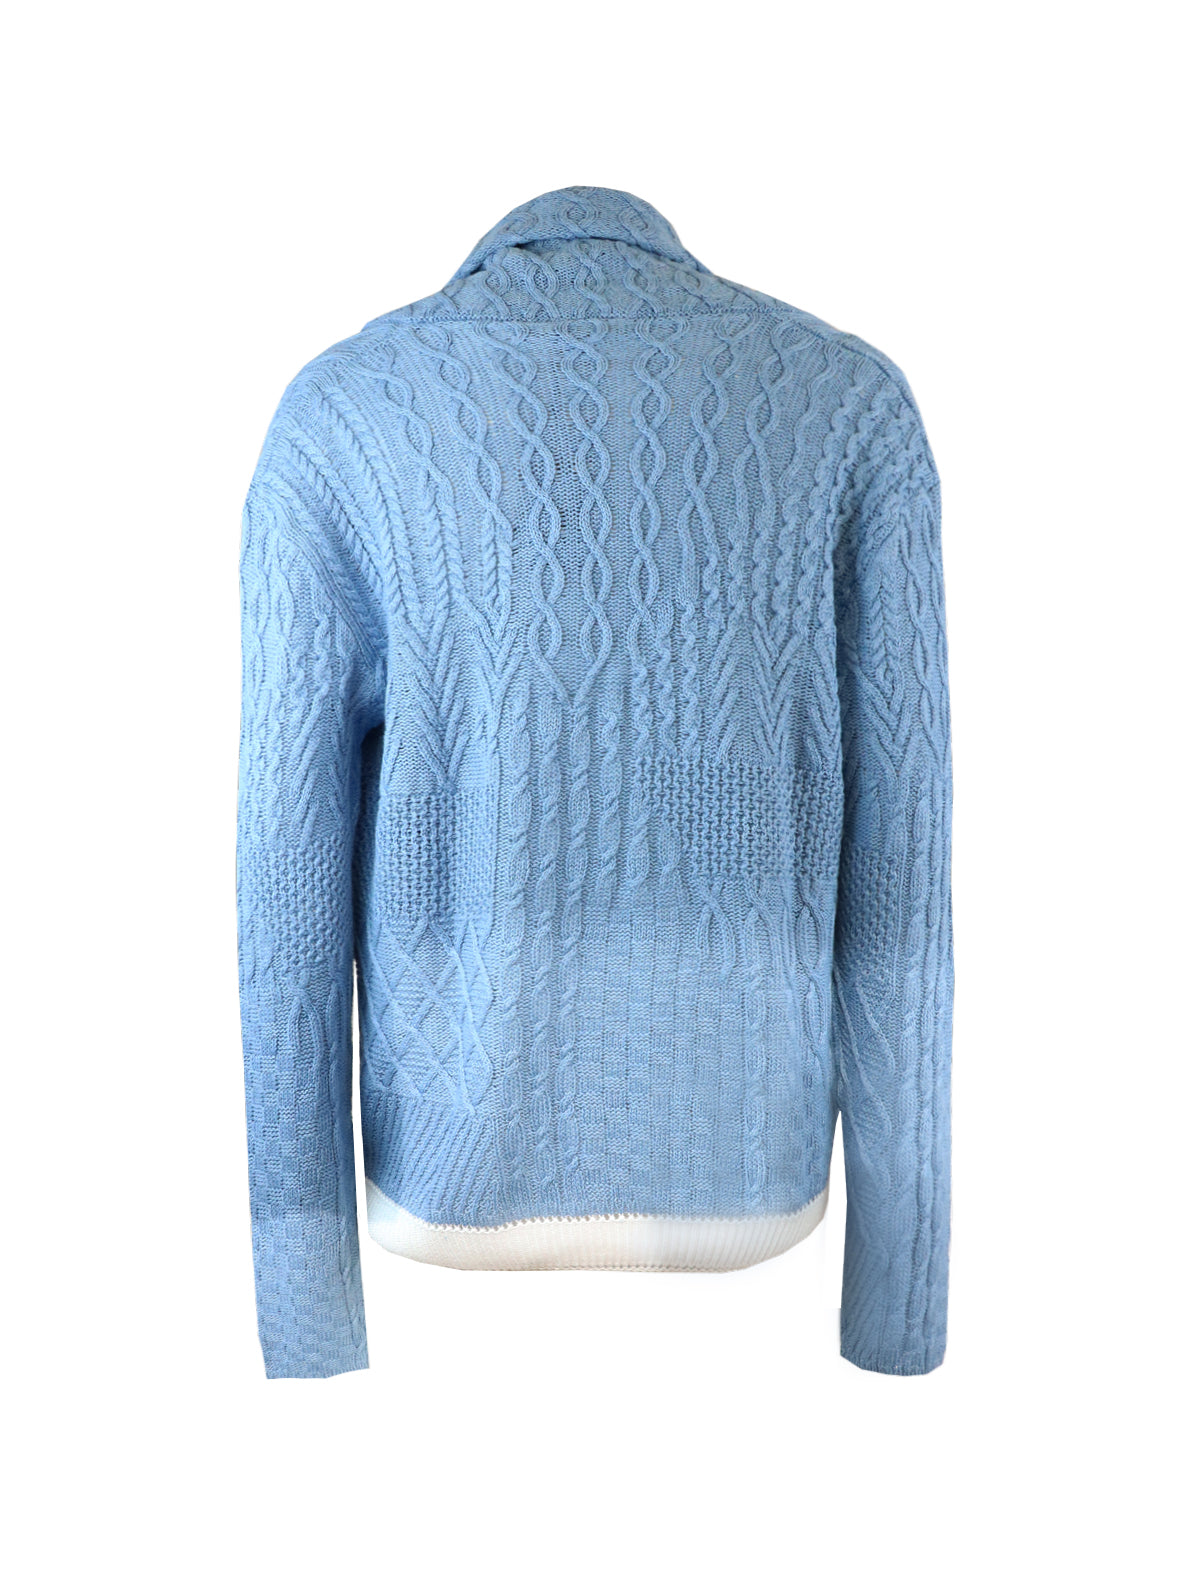 Gabriele Pasini Flax Cable Knit Cardigan in Blue/White